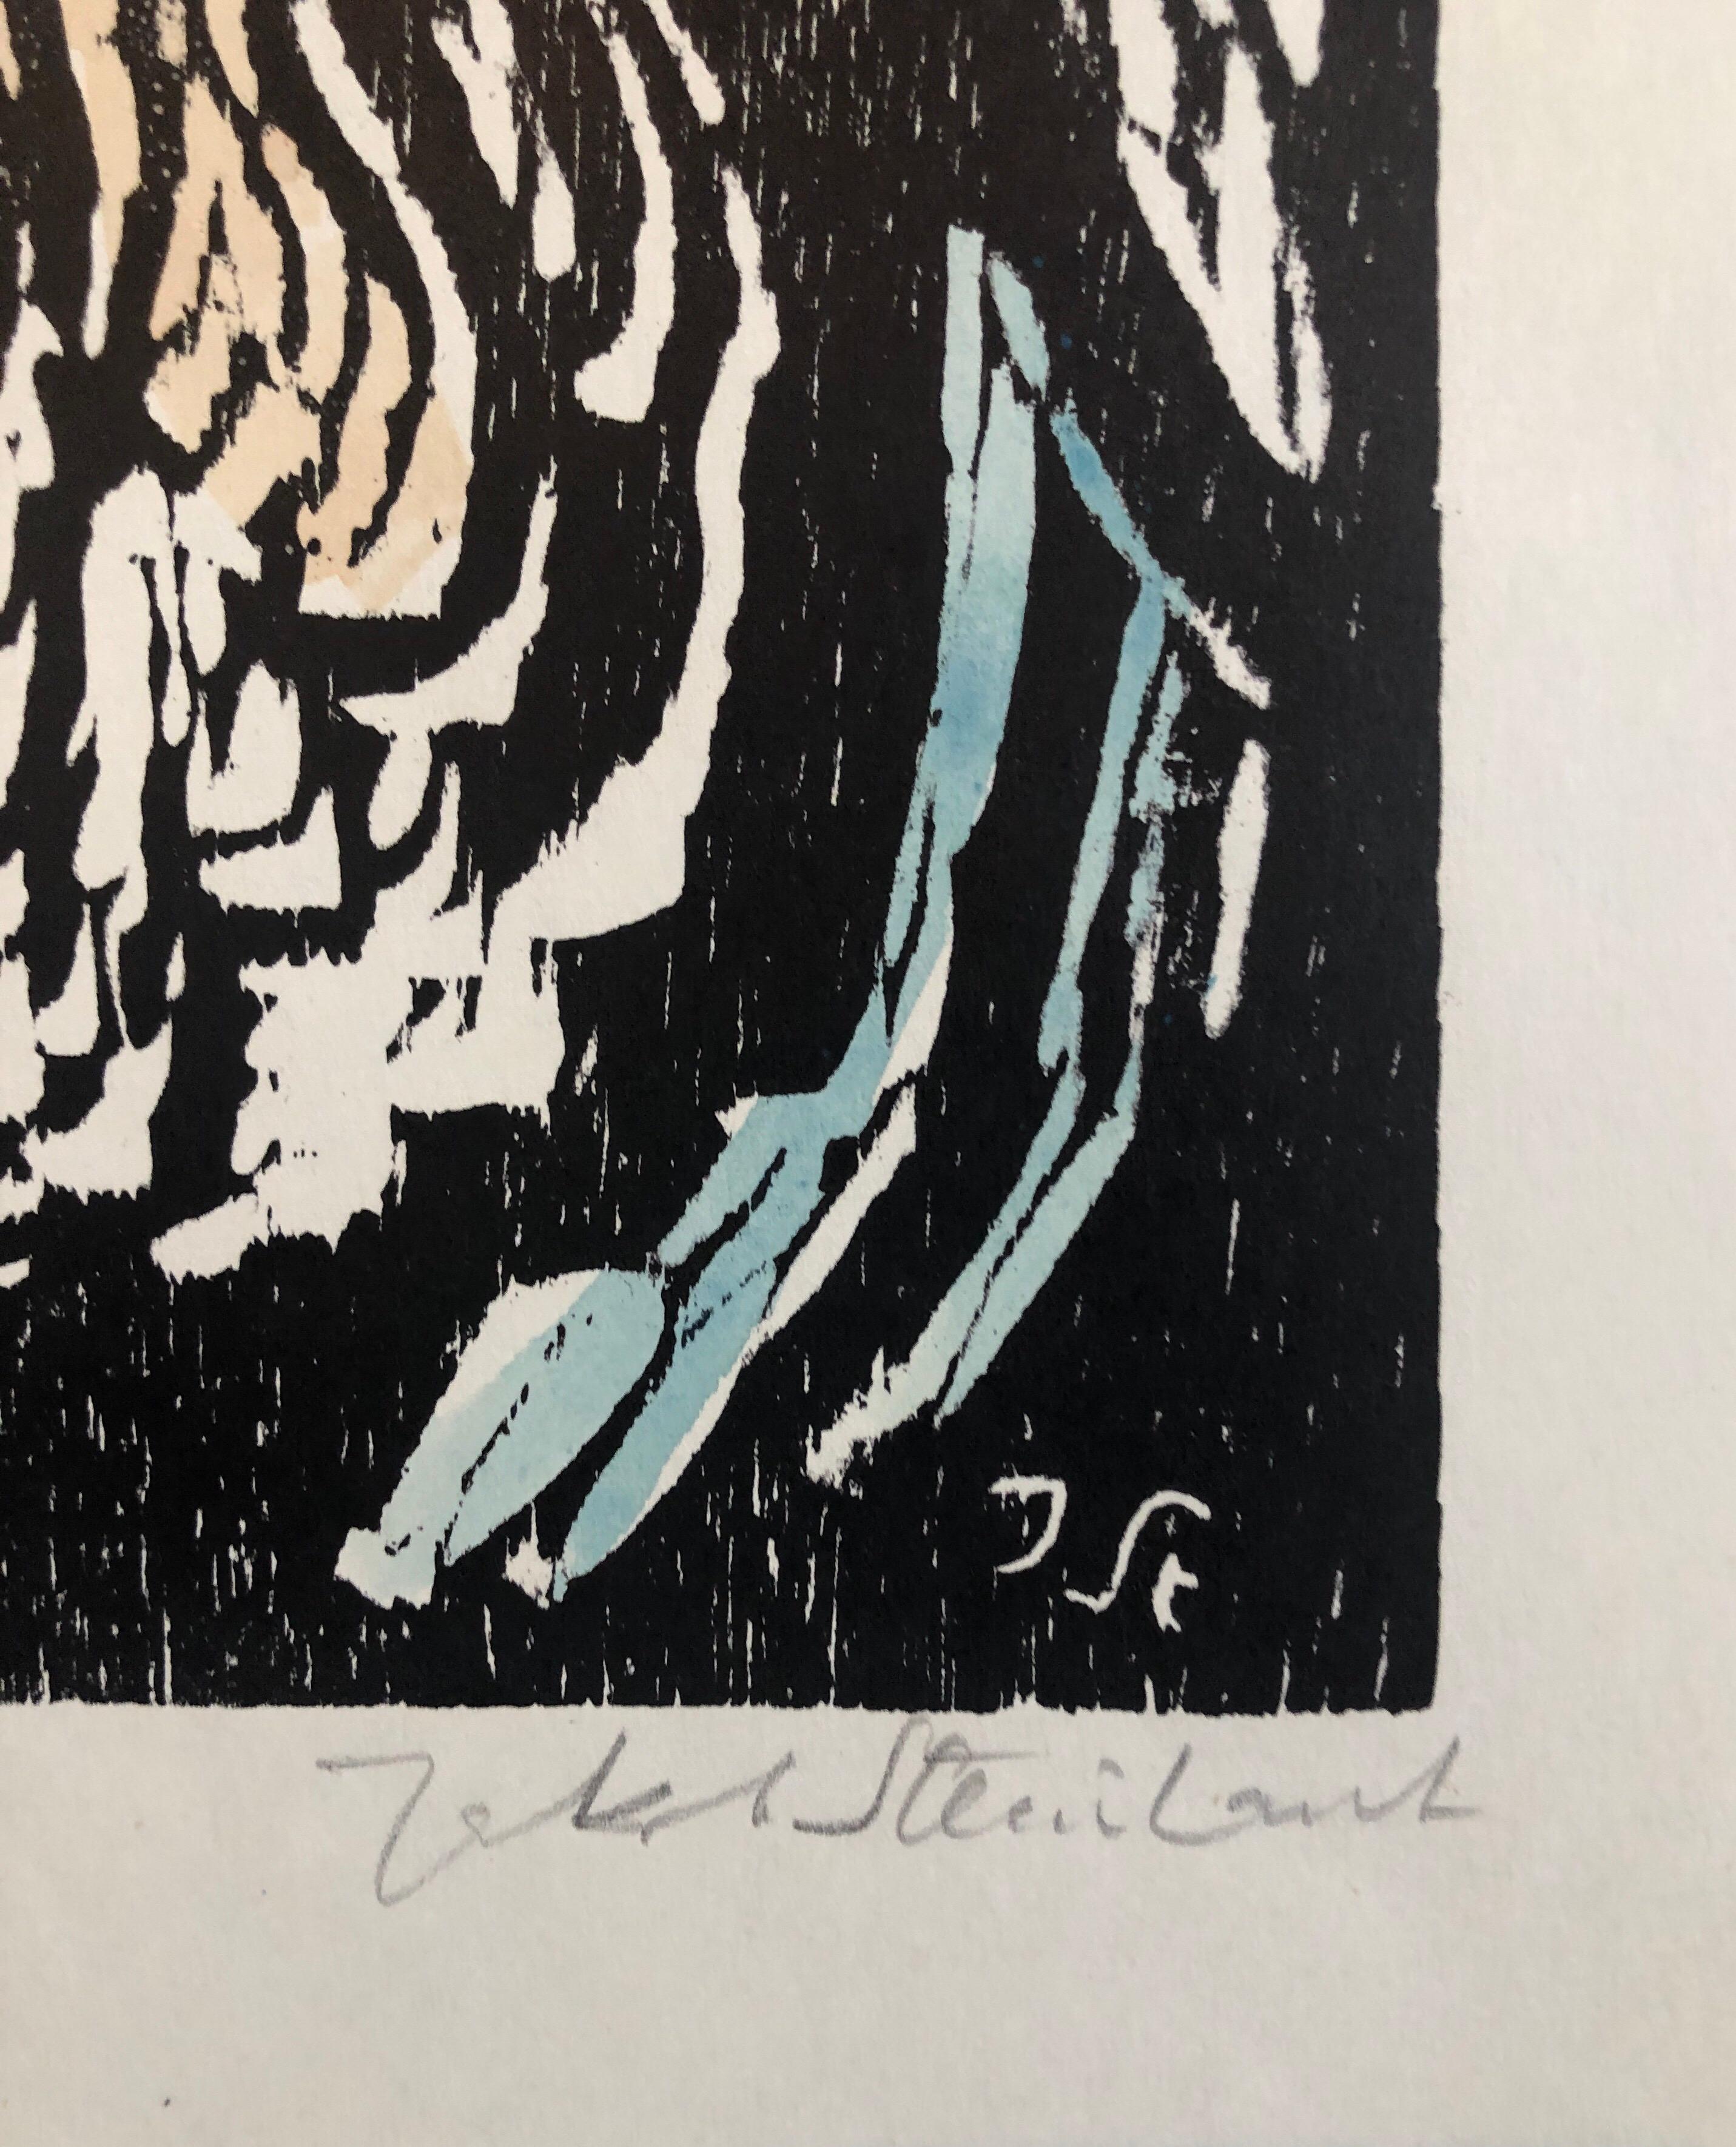 Hand signed in pencil, colored woodcut.

Jacob  Steinhardt 
1887-1968
 
Steinhardt, Jakob, Painter and Woodcut Artist. b. 1887, Yaacov Steinhardt was born in the then remote, largely Polish town of Zerkow in the Posen District of Germany.